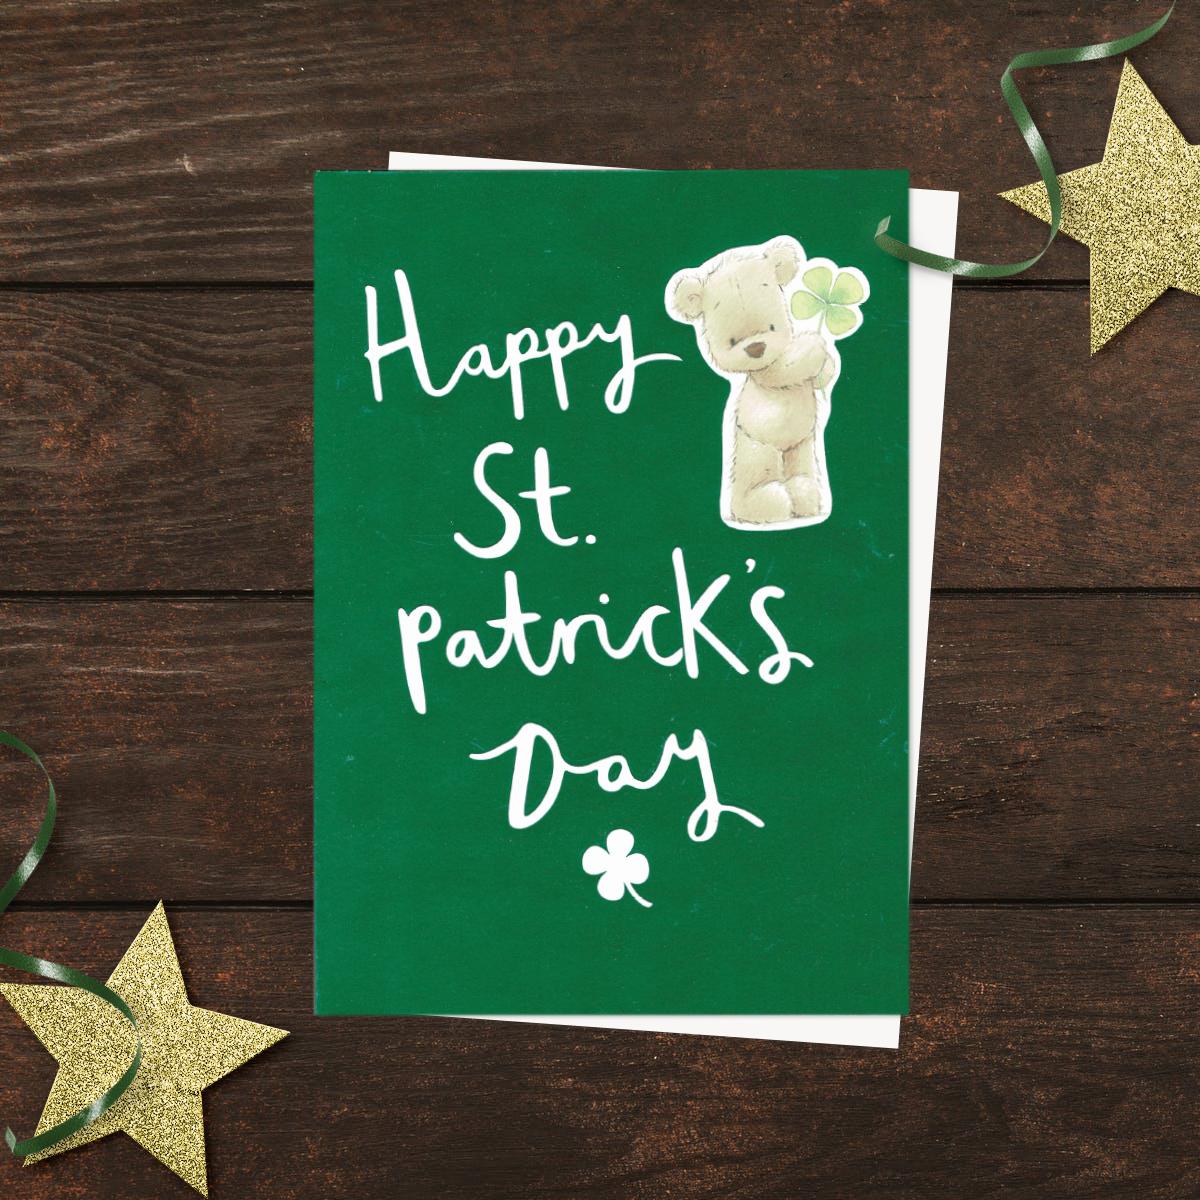 Happy St. Patrick's Day' Card Showing Cute Bear Holding Clover. With White Envelope